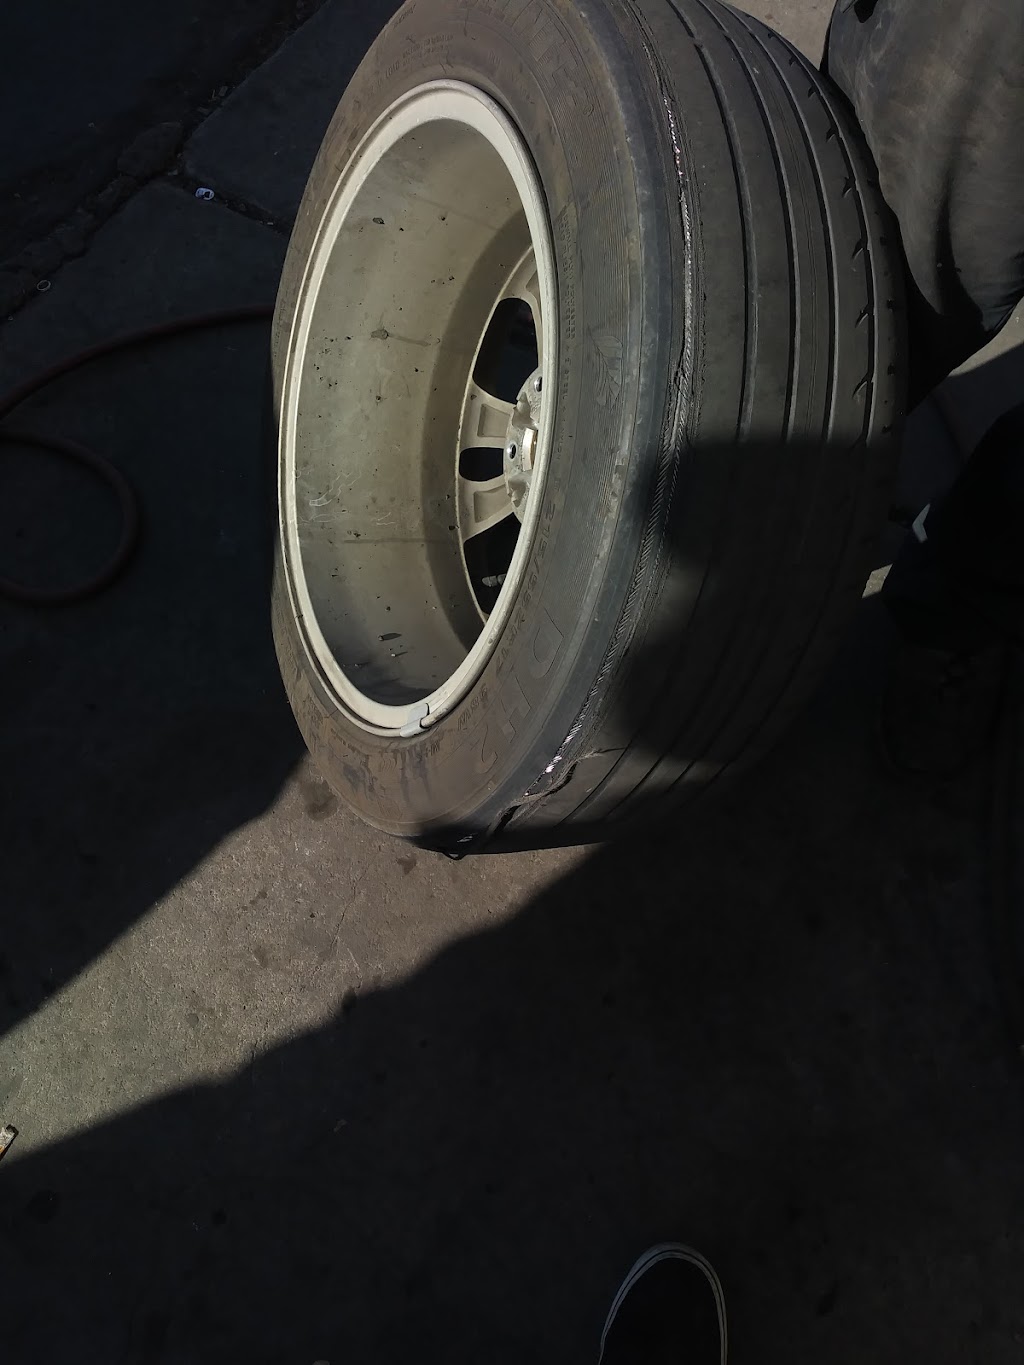 New & Used Tires | 7928 W 11th St, Tracy, CA 95304 | Phone: (209) 833-0022